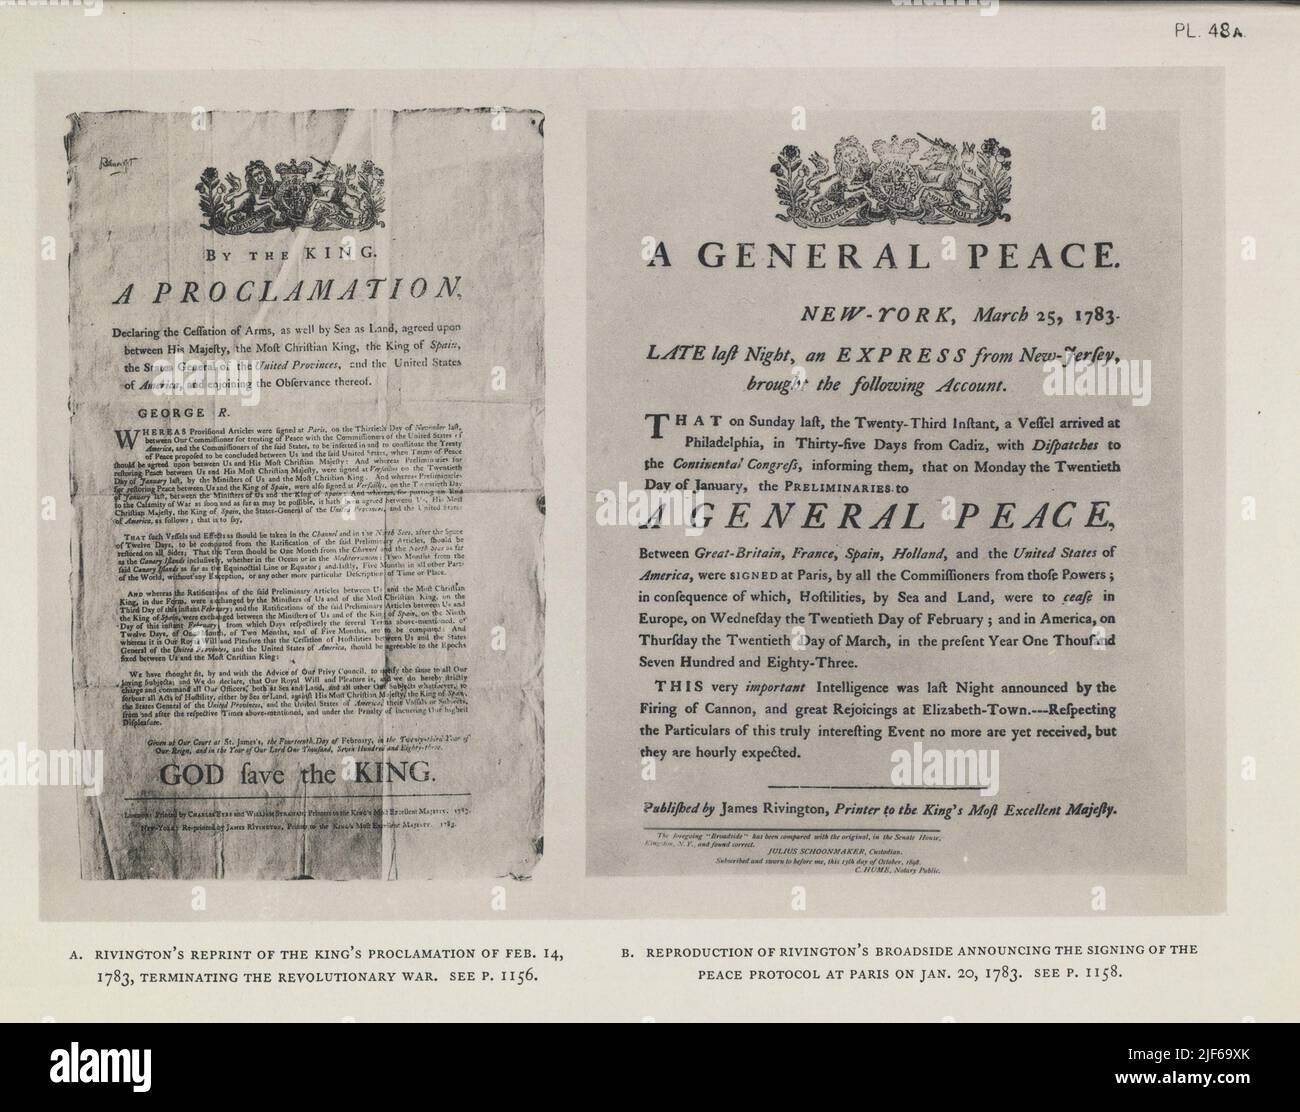 RIVINGTON’S REPRINT OF THE KING’S PROCLAMATION OF FEB. 14, 1783, TERMINATING THE REVOLUTIONARY WAR. [left] REPRODUCTION OF RIVINGTON’S BROADSIDE ANNOUNCING THE SIGNING OF PEACE PROTOCOL AT PARIS ON JAN. 20, 1783; DATED MCH. 25, 1783. [Right] from the book  The iconography of Manhattan Island, 1498-1909 compiled from original sources and illustrated by photo-intaglio reproductions of important maps, plans, views, and documents in public and private collections - Volume 5 by Stokes, I. N. Phelps (Isaac Newton Phelps), 1867-1944 Stock Photo